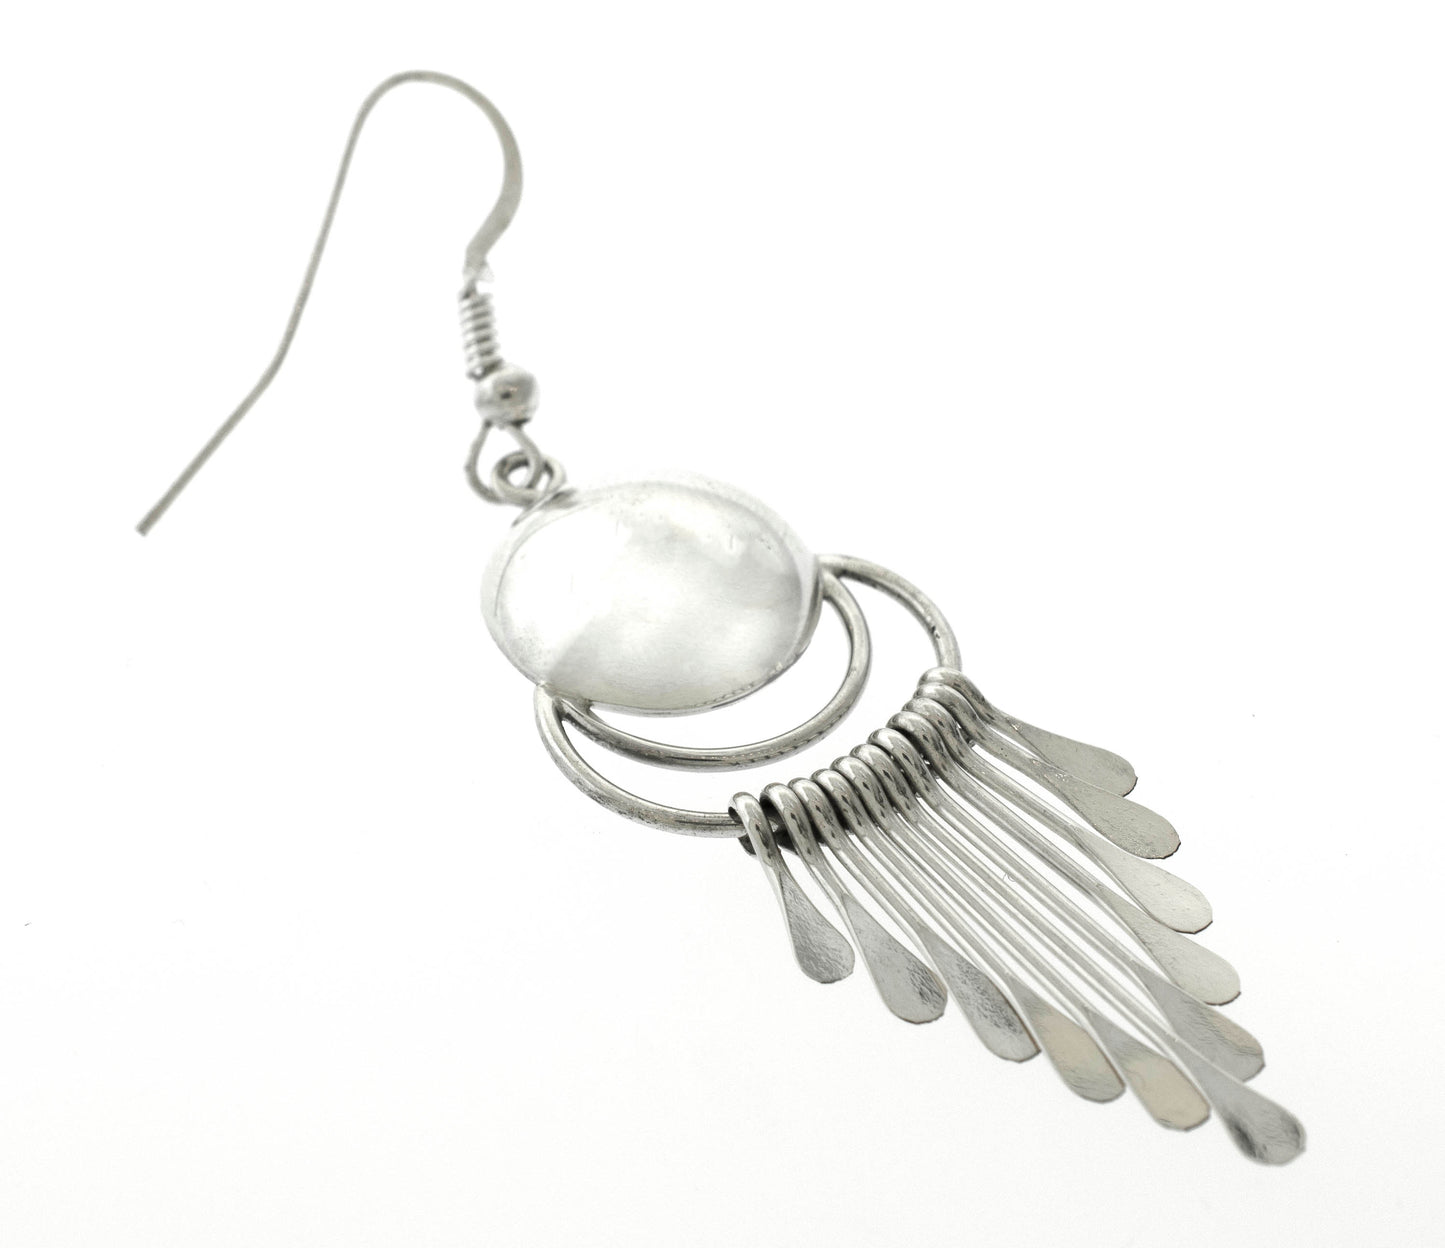 Authentic Super Silver Native American Navajo chandelier earrings crafted with sterling silver and adorned with a mother of pearl dangle.